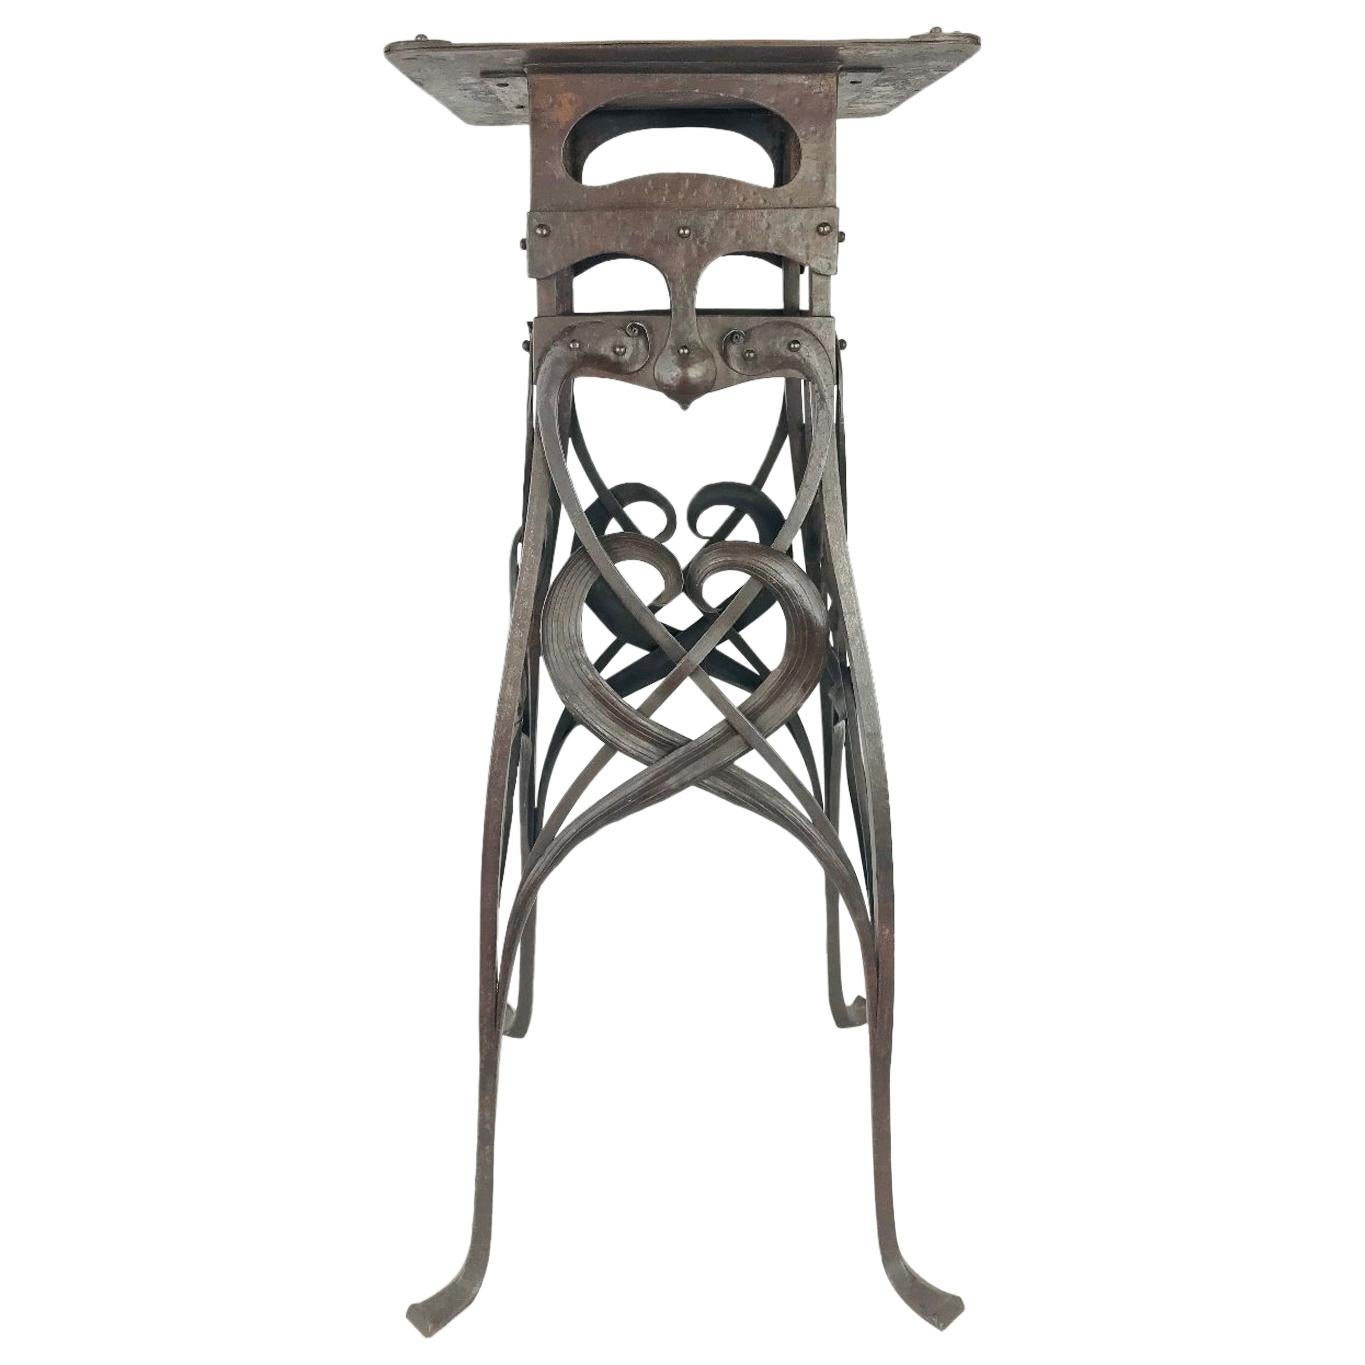 Art Nouveau Handwrought Iron and Steel Table Hermann Obrist